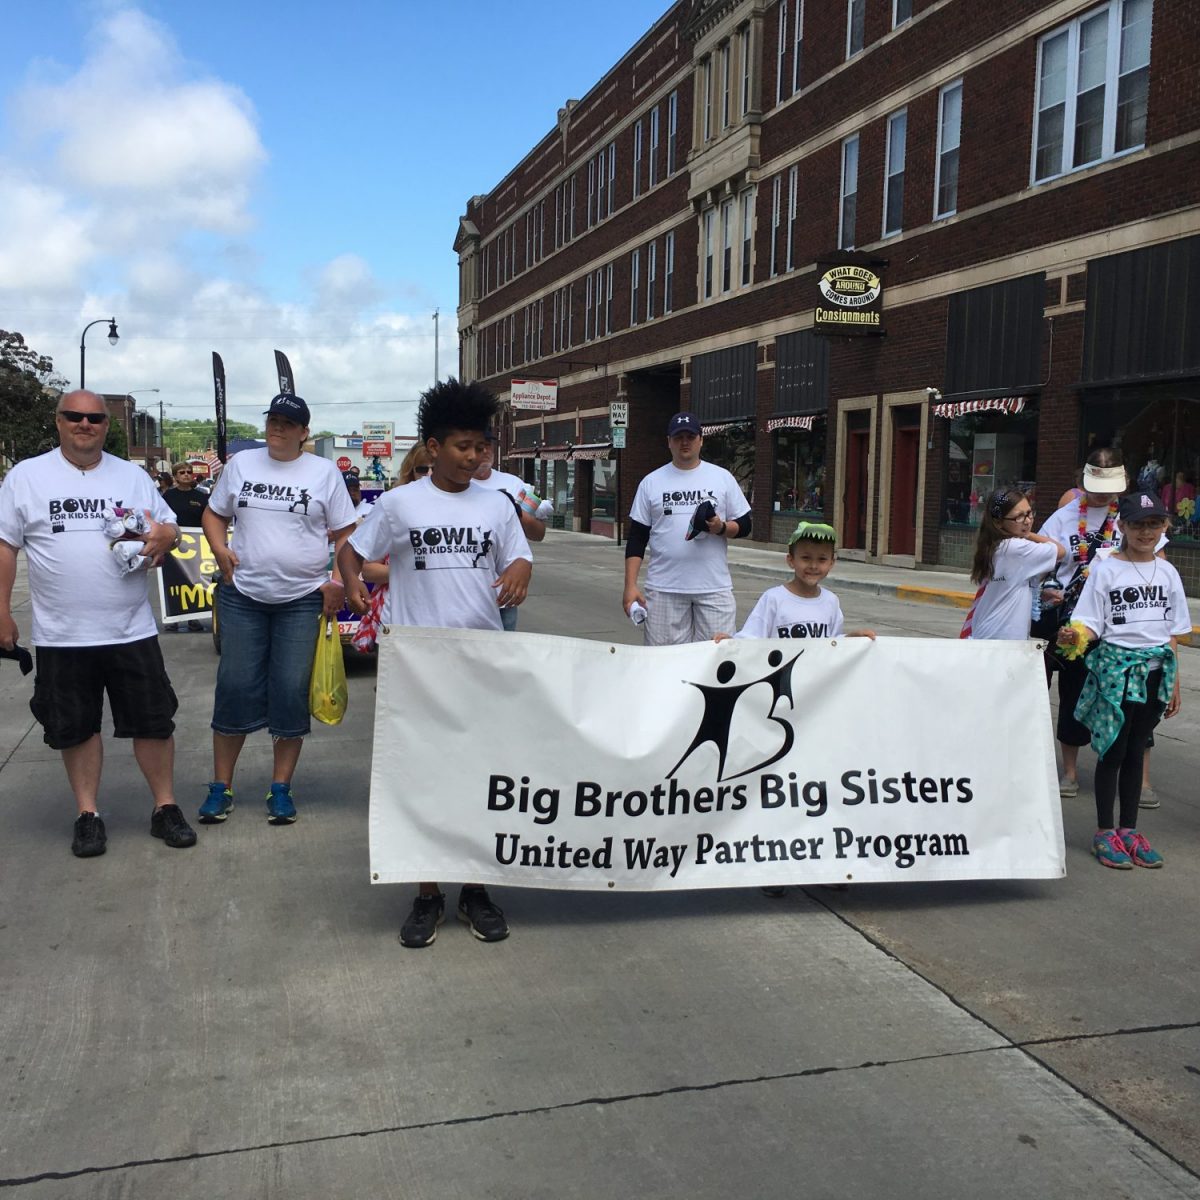 Big Brothers Big Sisters is looking to make a big impact in the community in the upcoming year.